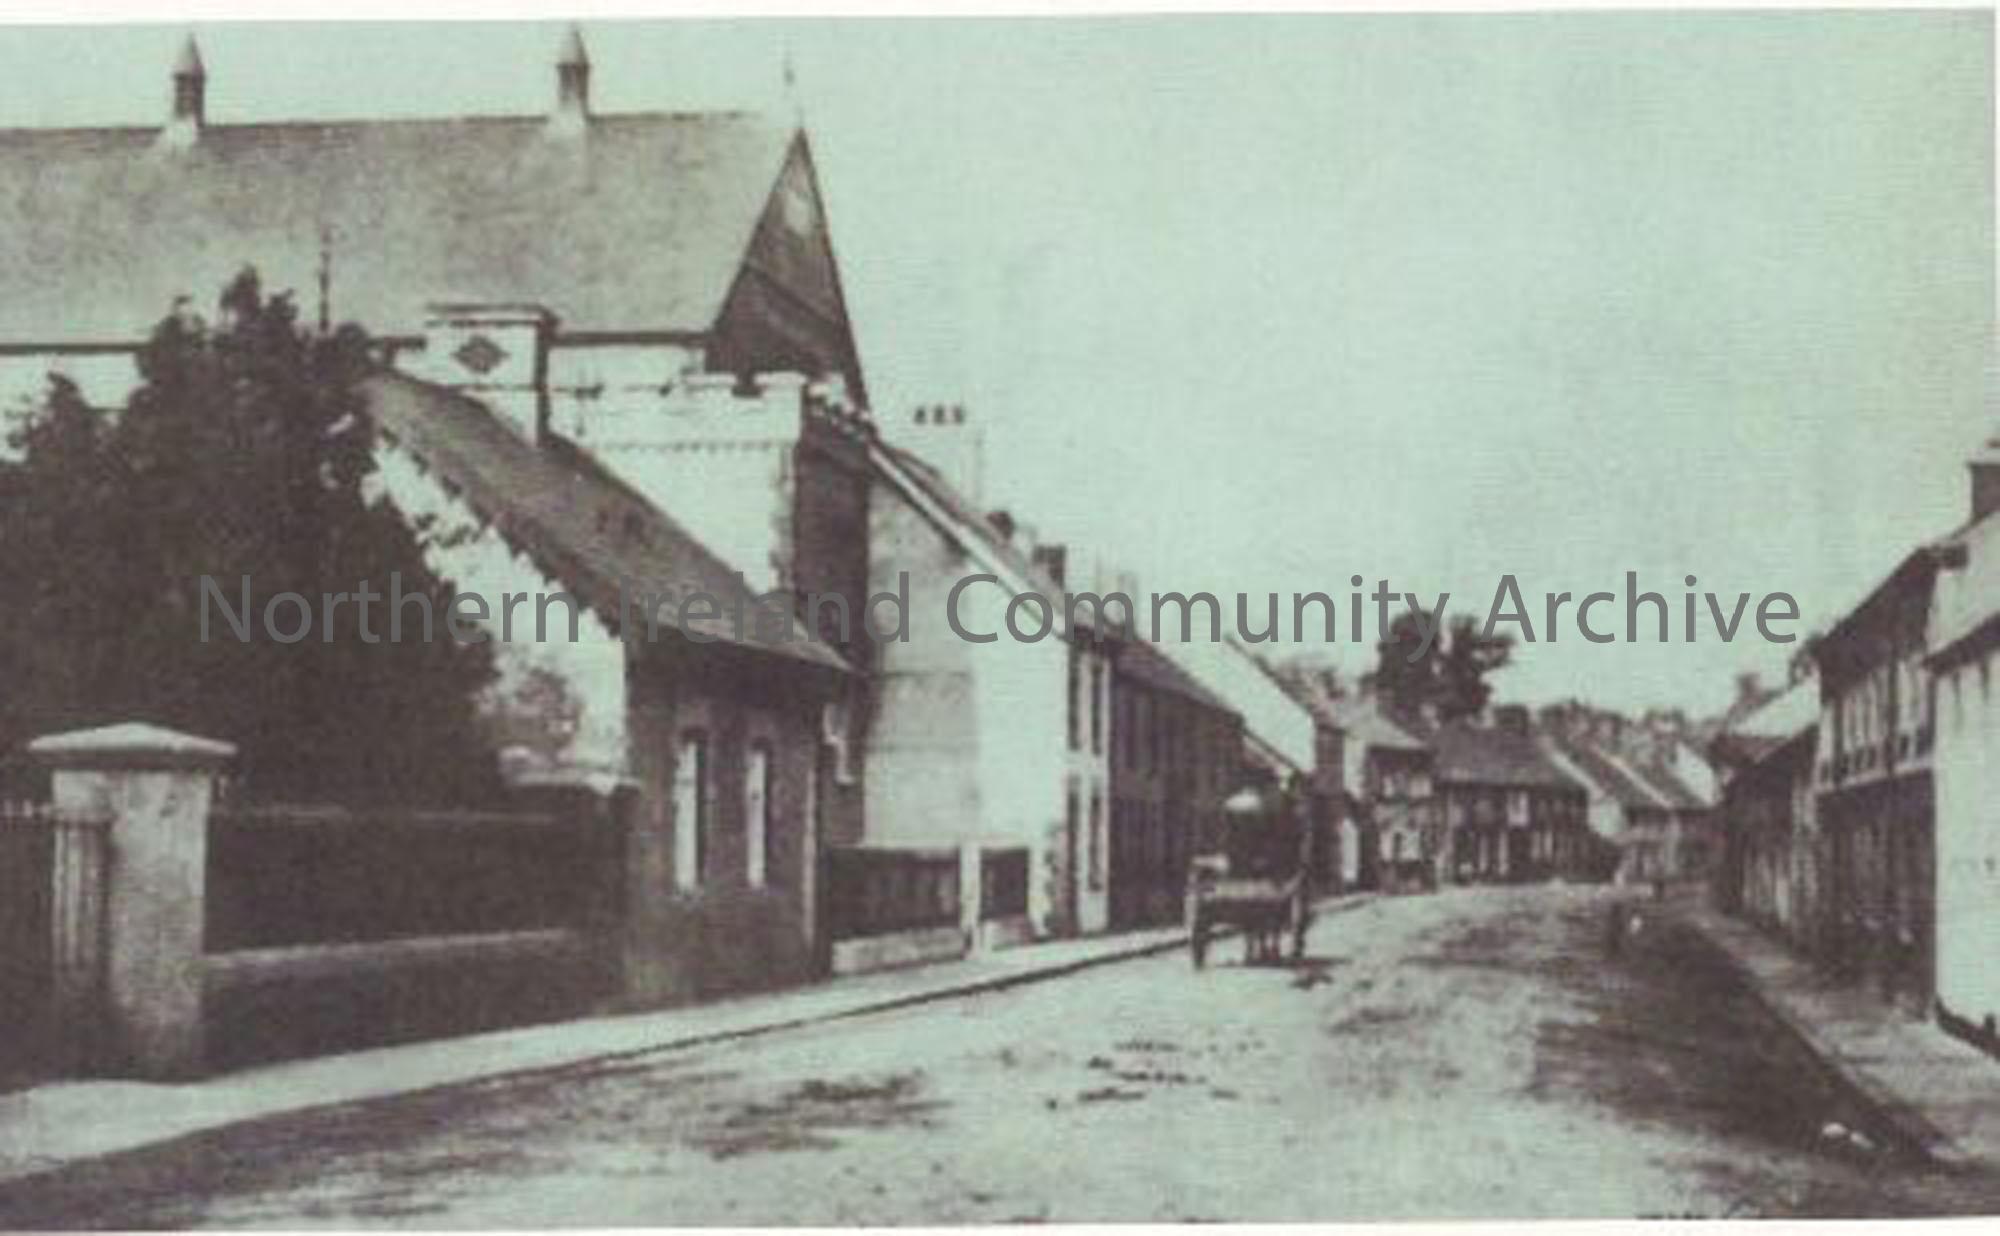 1900 showing old parochial hall